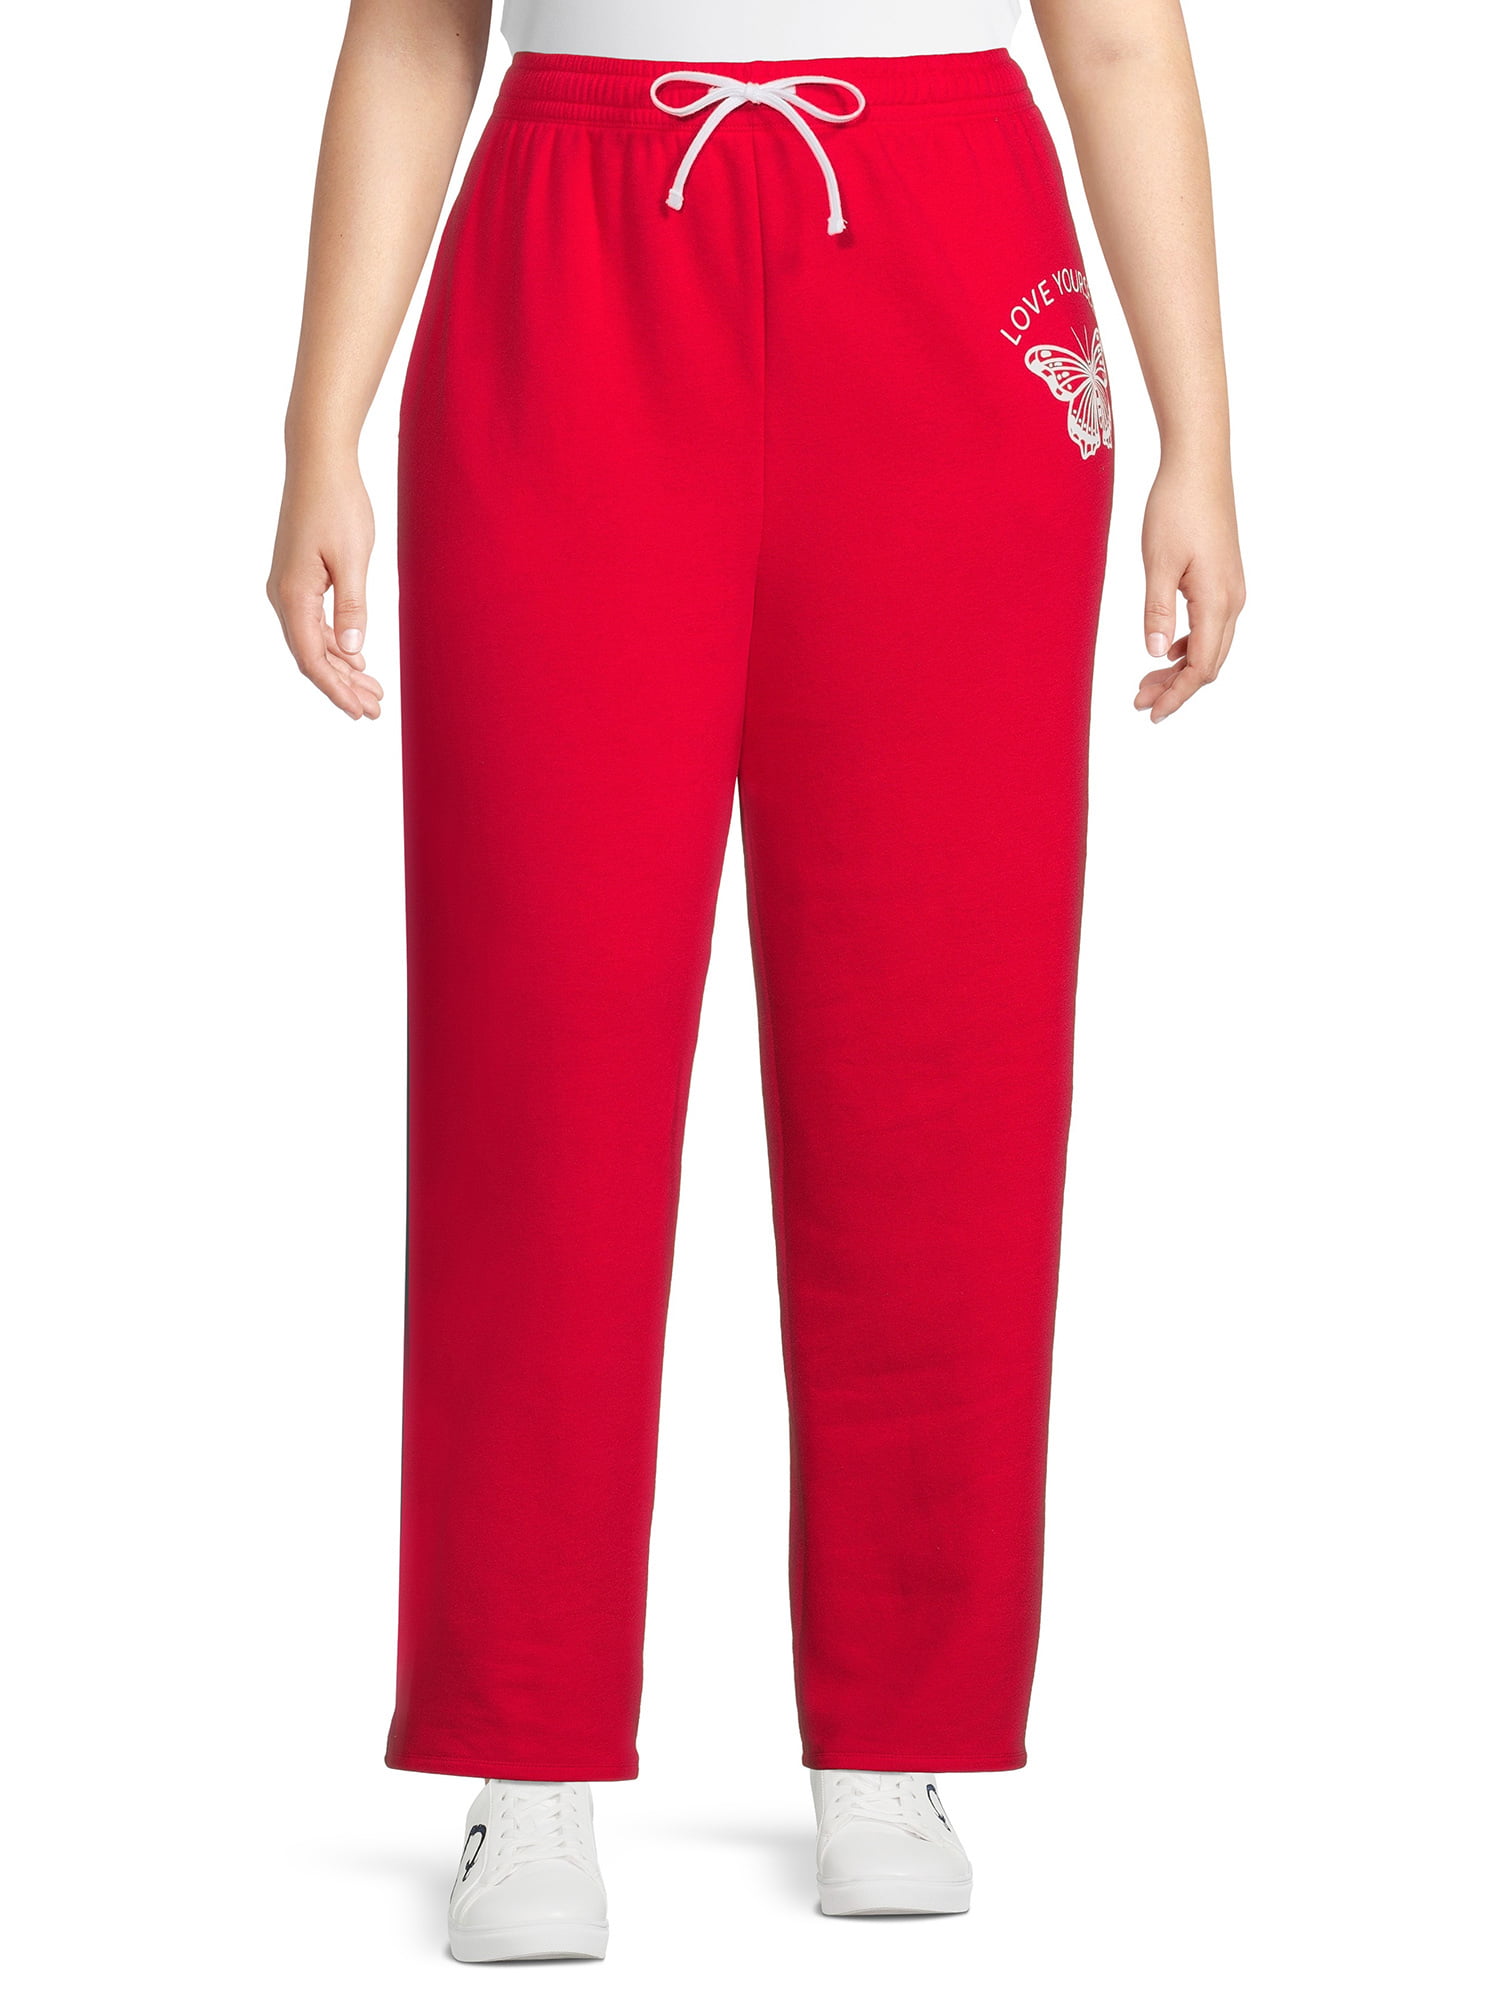 No Boundaries Junior Women's Red Pull-on Pants Size XL - $13 - From Brian